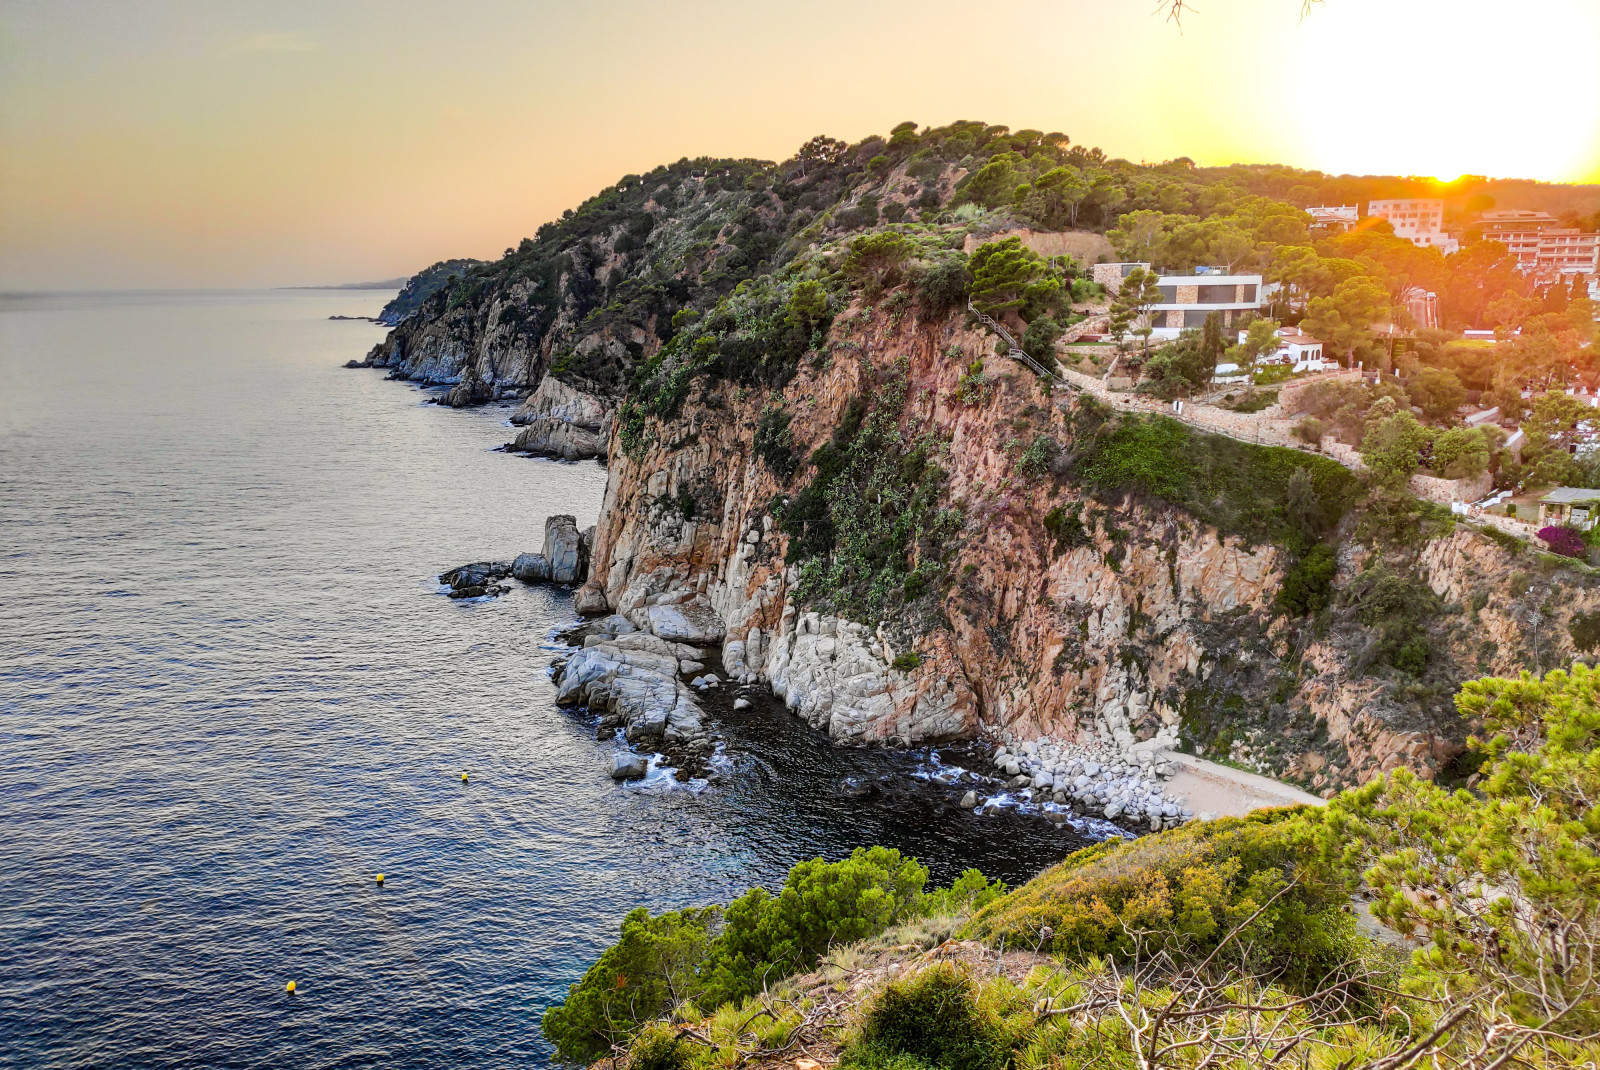 A seaside cliff in Costa Brava, Spain at sunset.